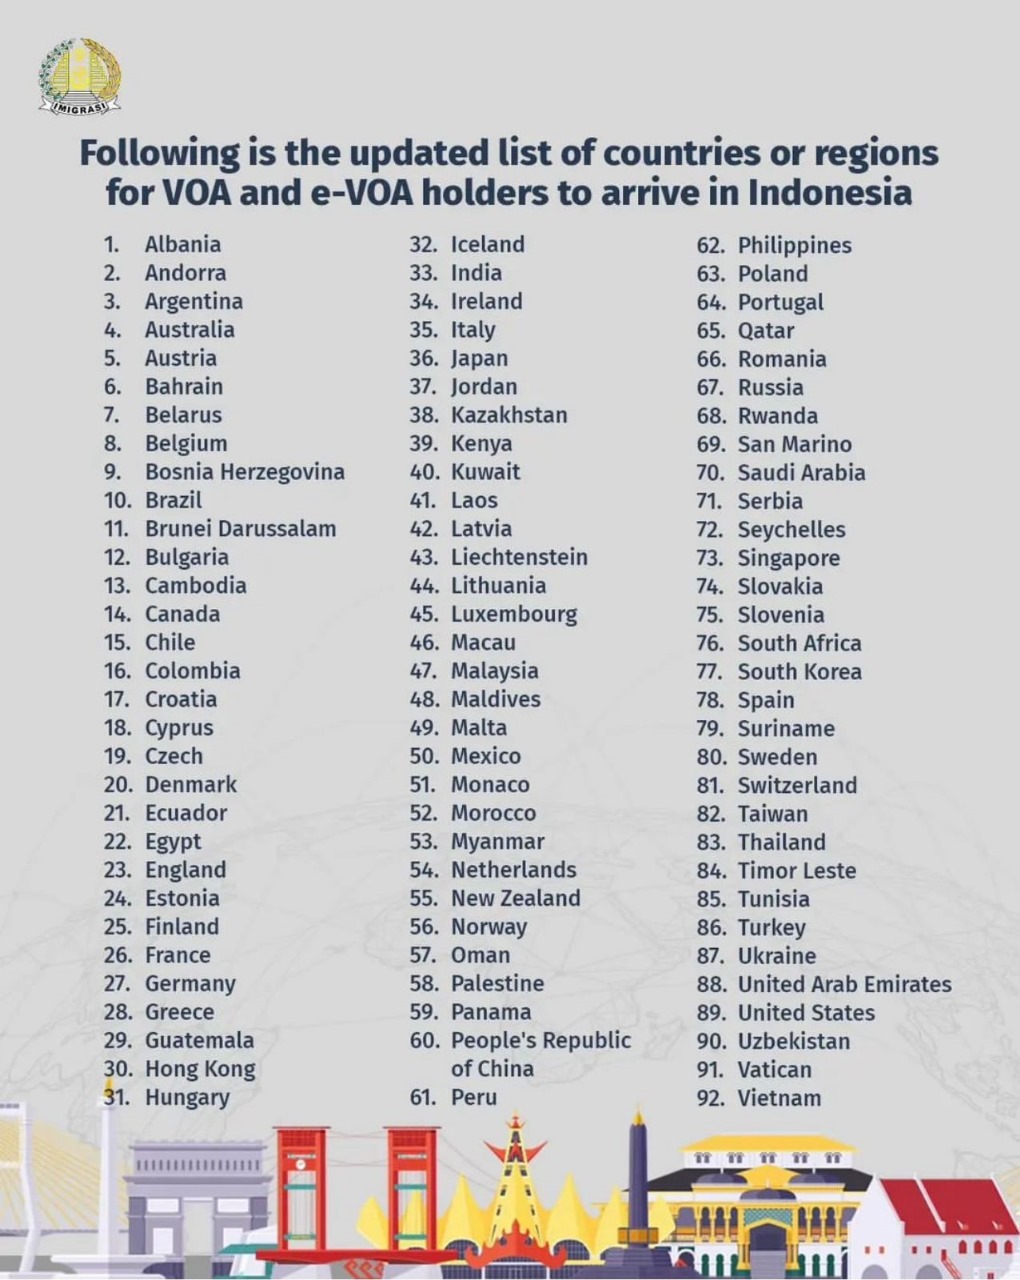 Updated List of Countries or regions for VOA and e-VOA to arrive in Indonesia